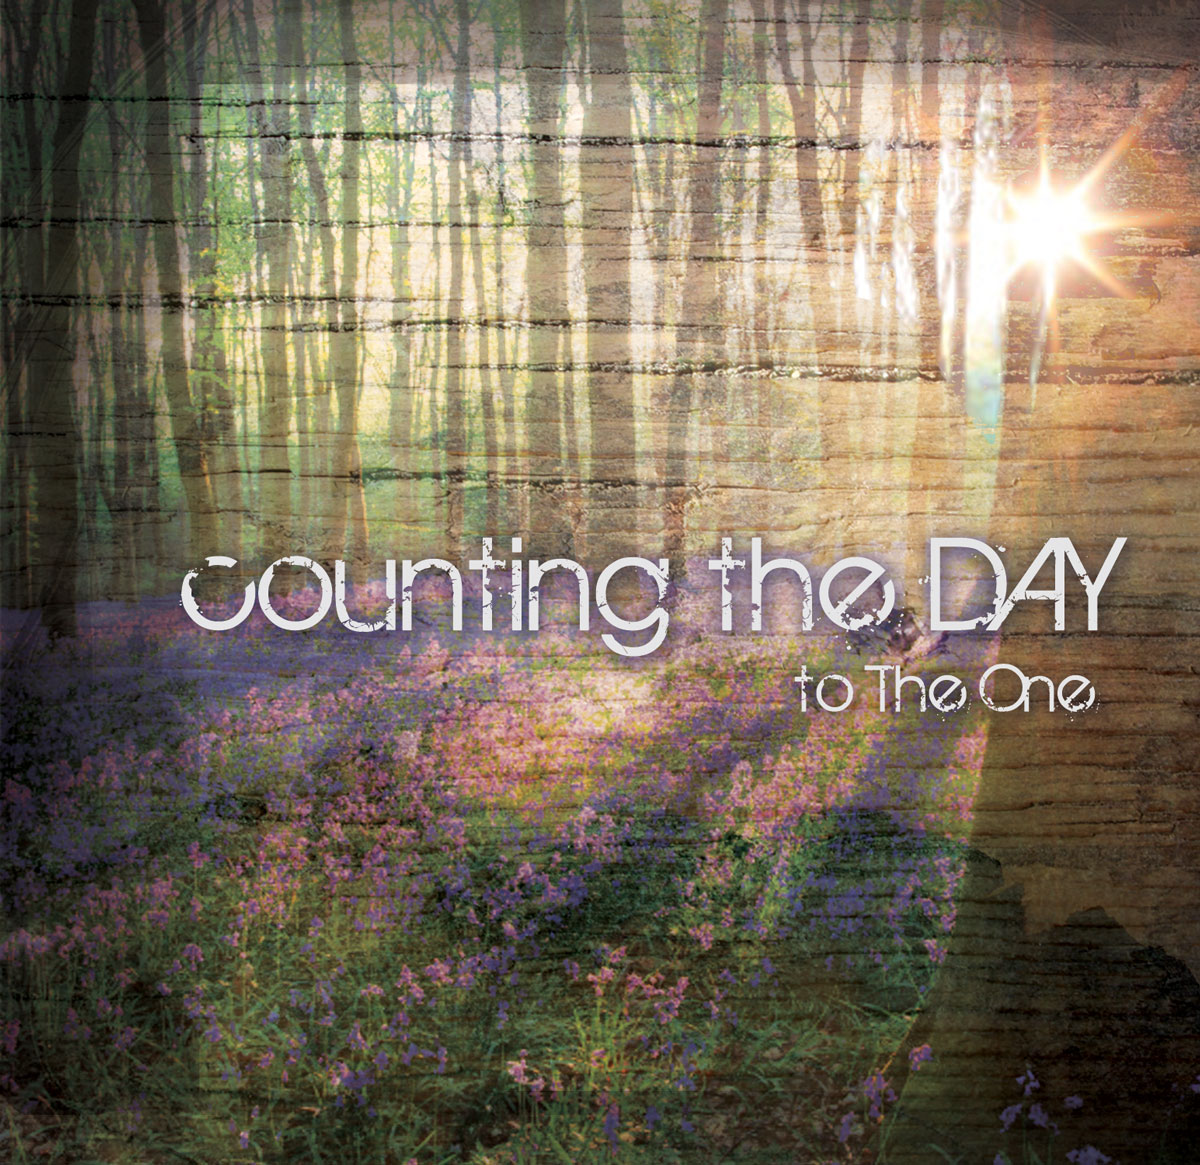 Counting the Day To the One CD Design | MDG Marketing Firm | Covington, Louisiana